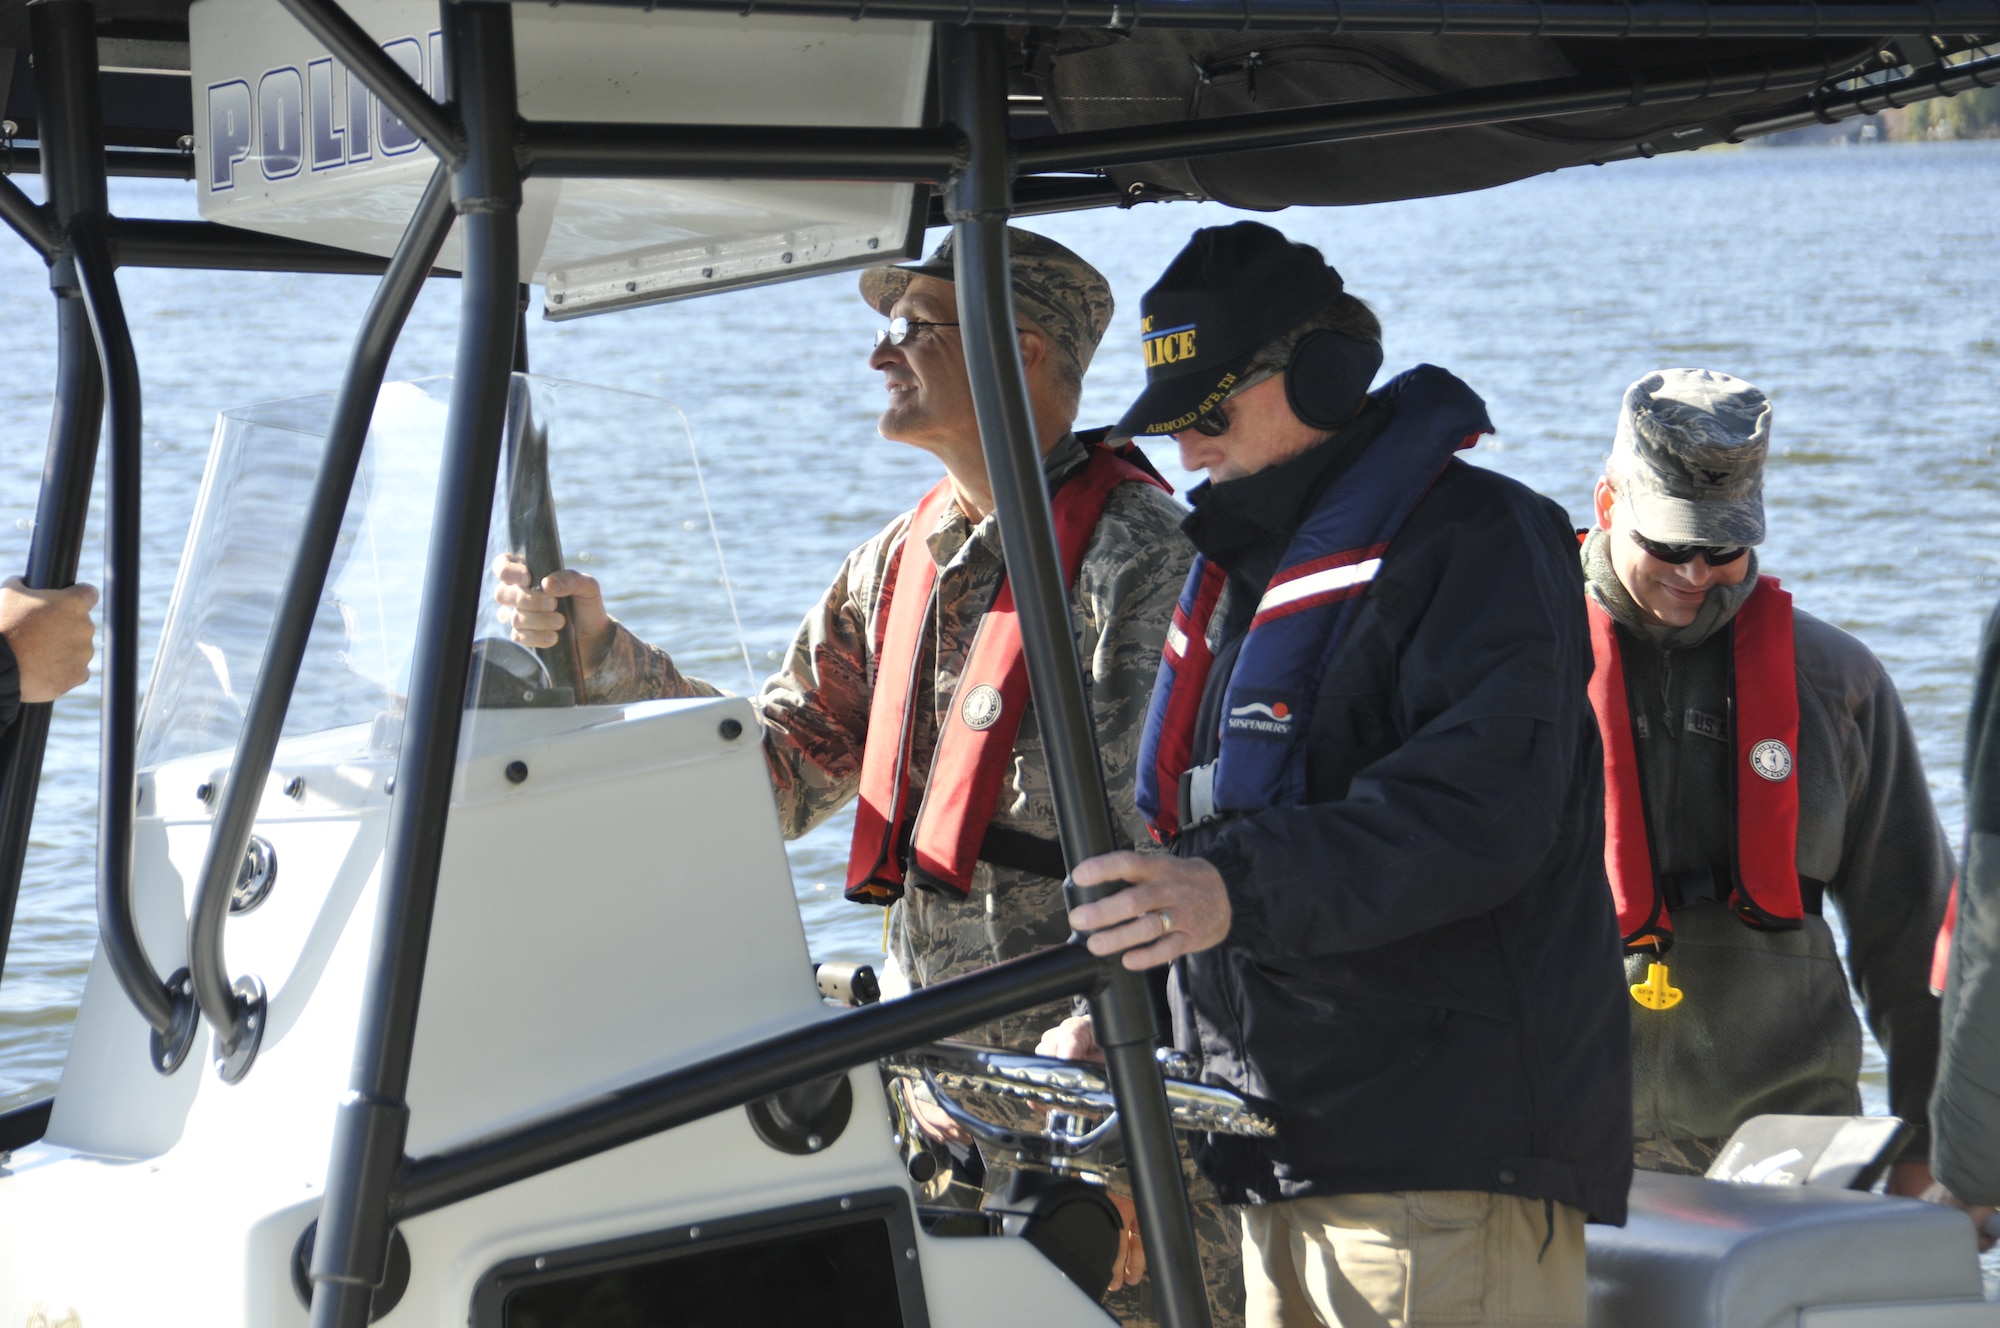 Maj. Gen. Arnold W. Bunch, Jr. (far left) takes a tour of the AEDC lake during a recent visit.  The two-star general spent four days at the Complex during October.  Since oversight of AEDC is part of his responsibilities, Bunch tries to make regular, routine visits to middle Tennessee.  Also pictured:  Arnold Operations Captain Kevin Syler (middle) and AEDC Commander Col. Raymond Toth. 